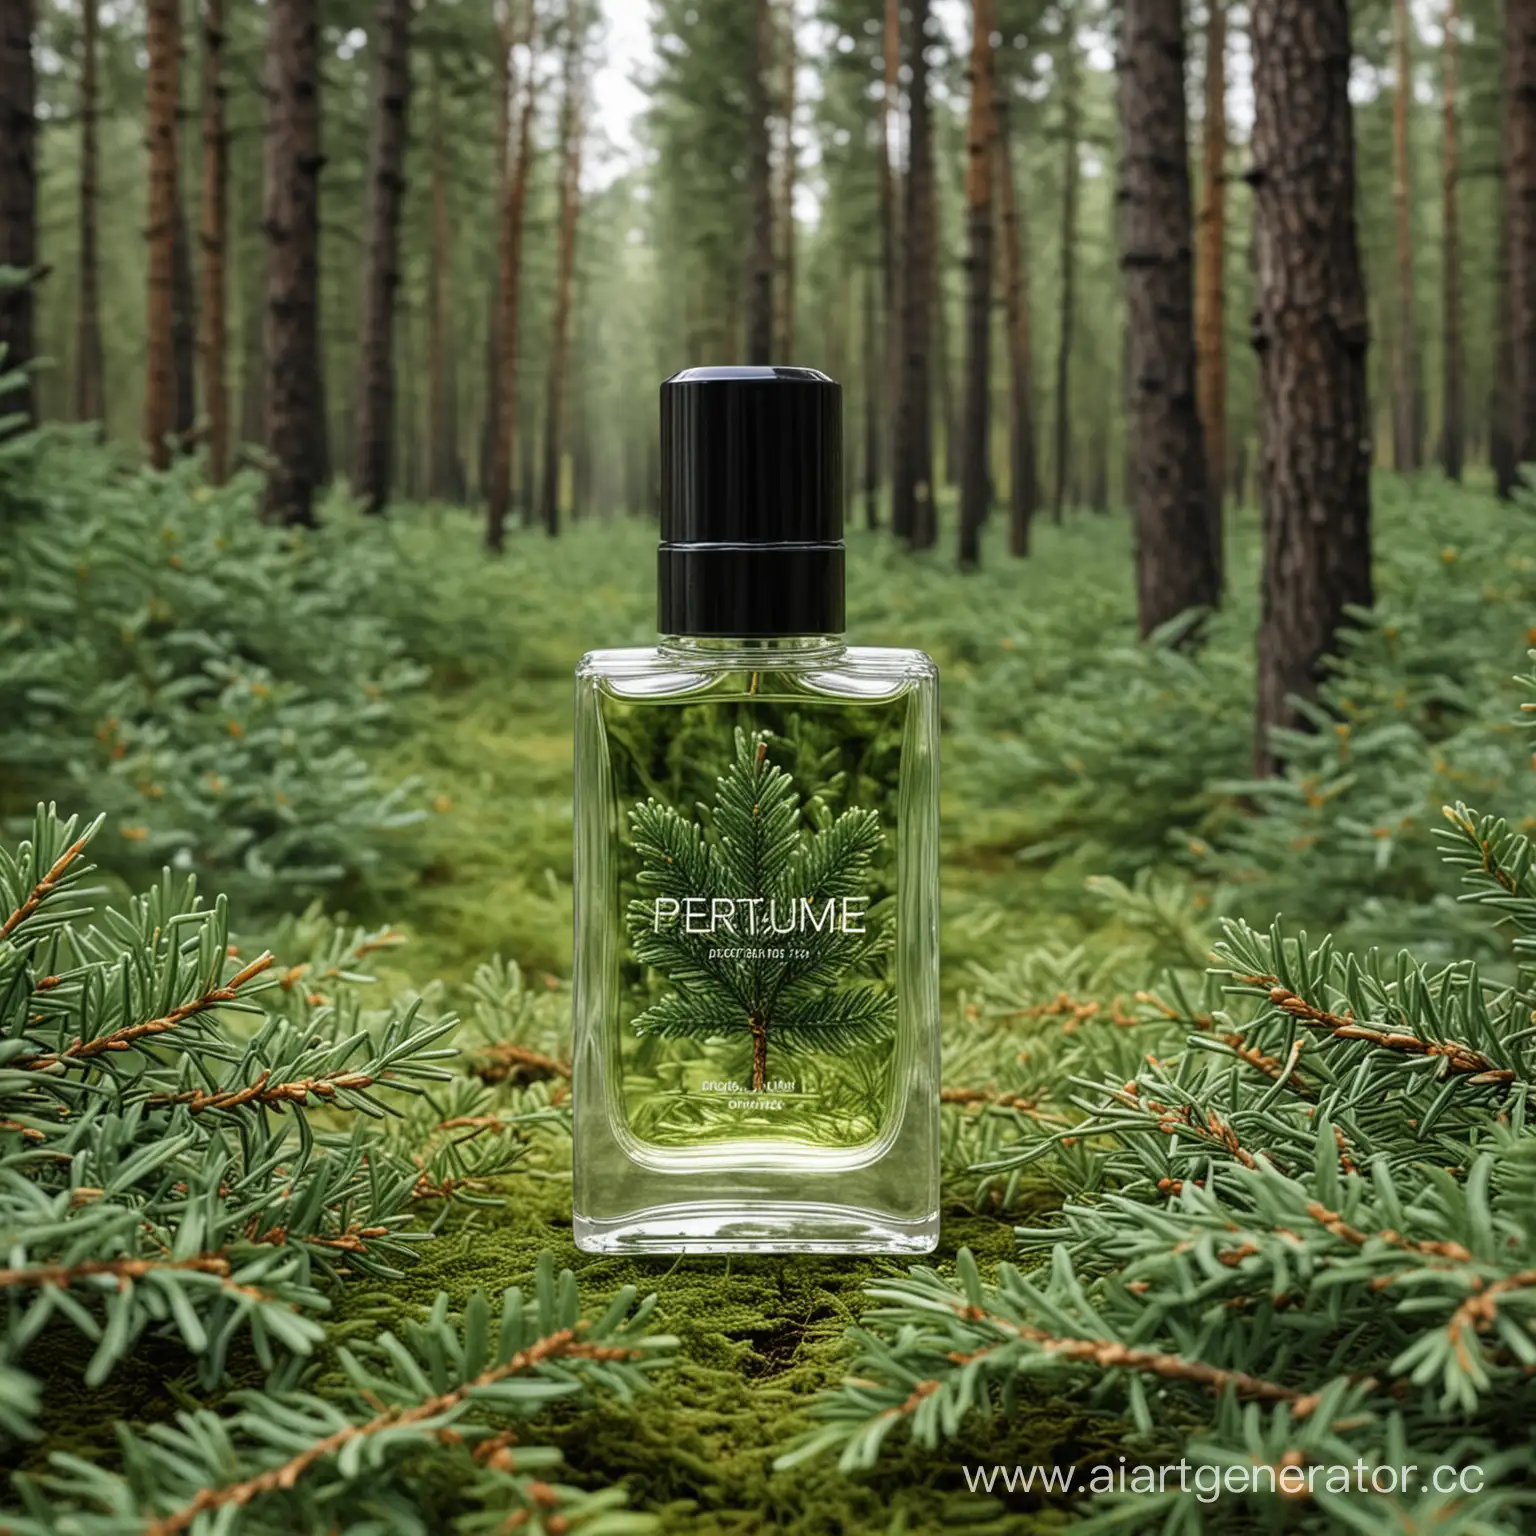 Perfume-Bottle-with-Spruce-Scent-Against-Forest-Backdrop